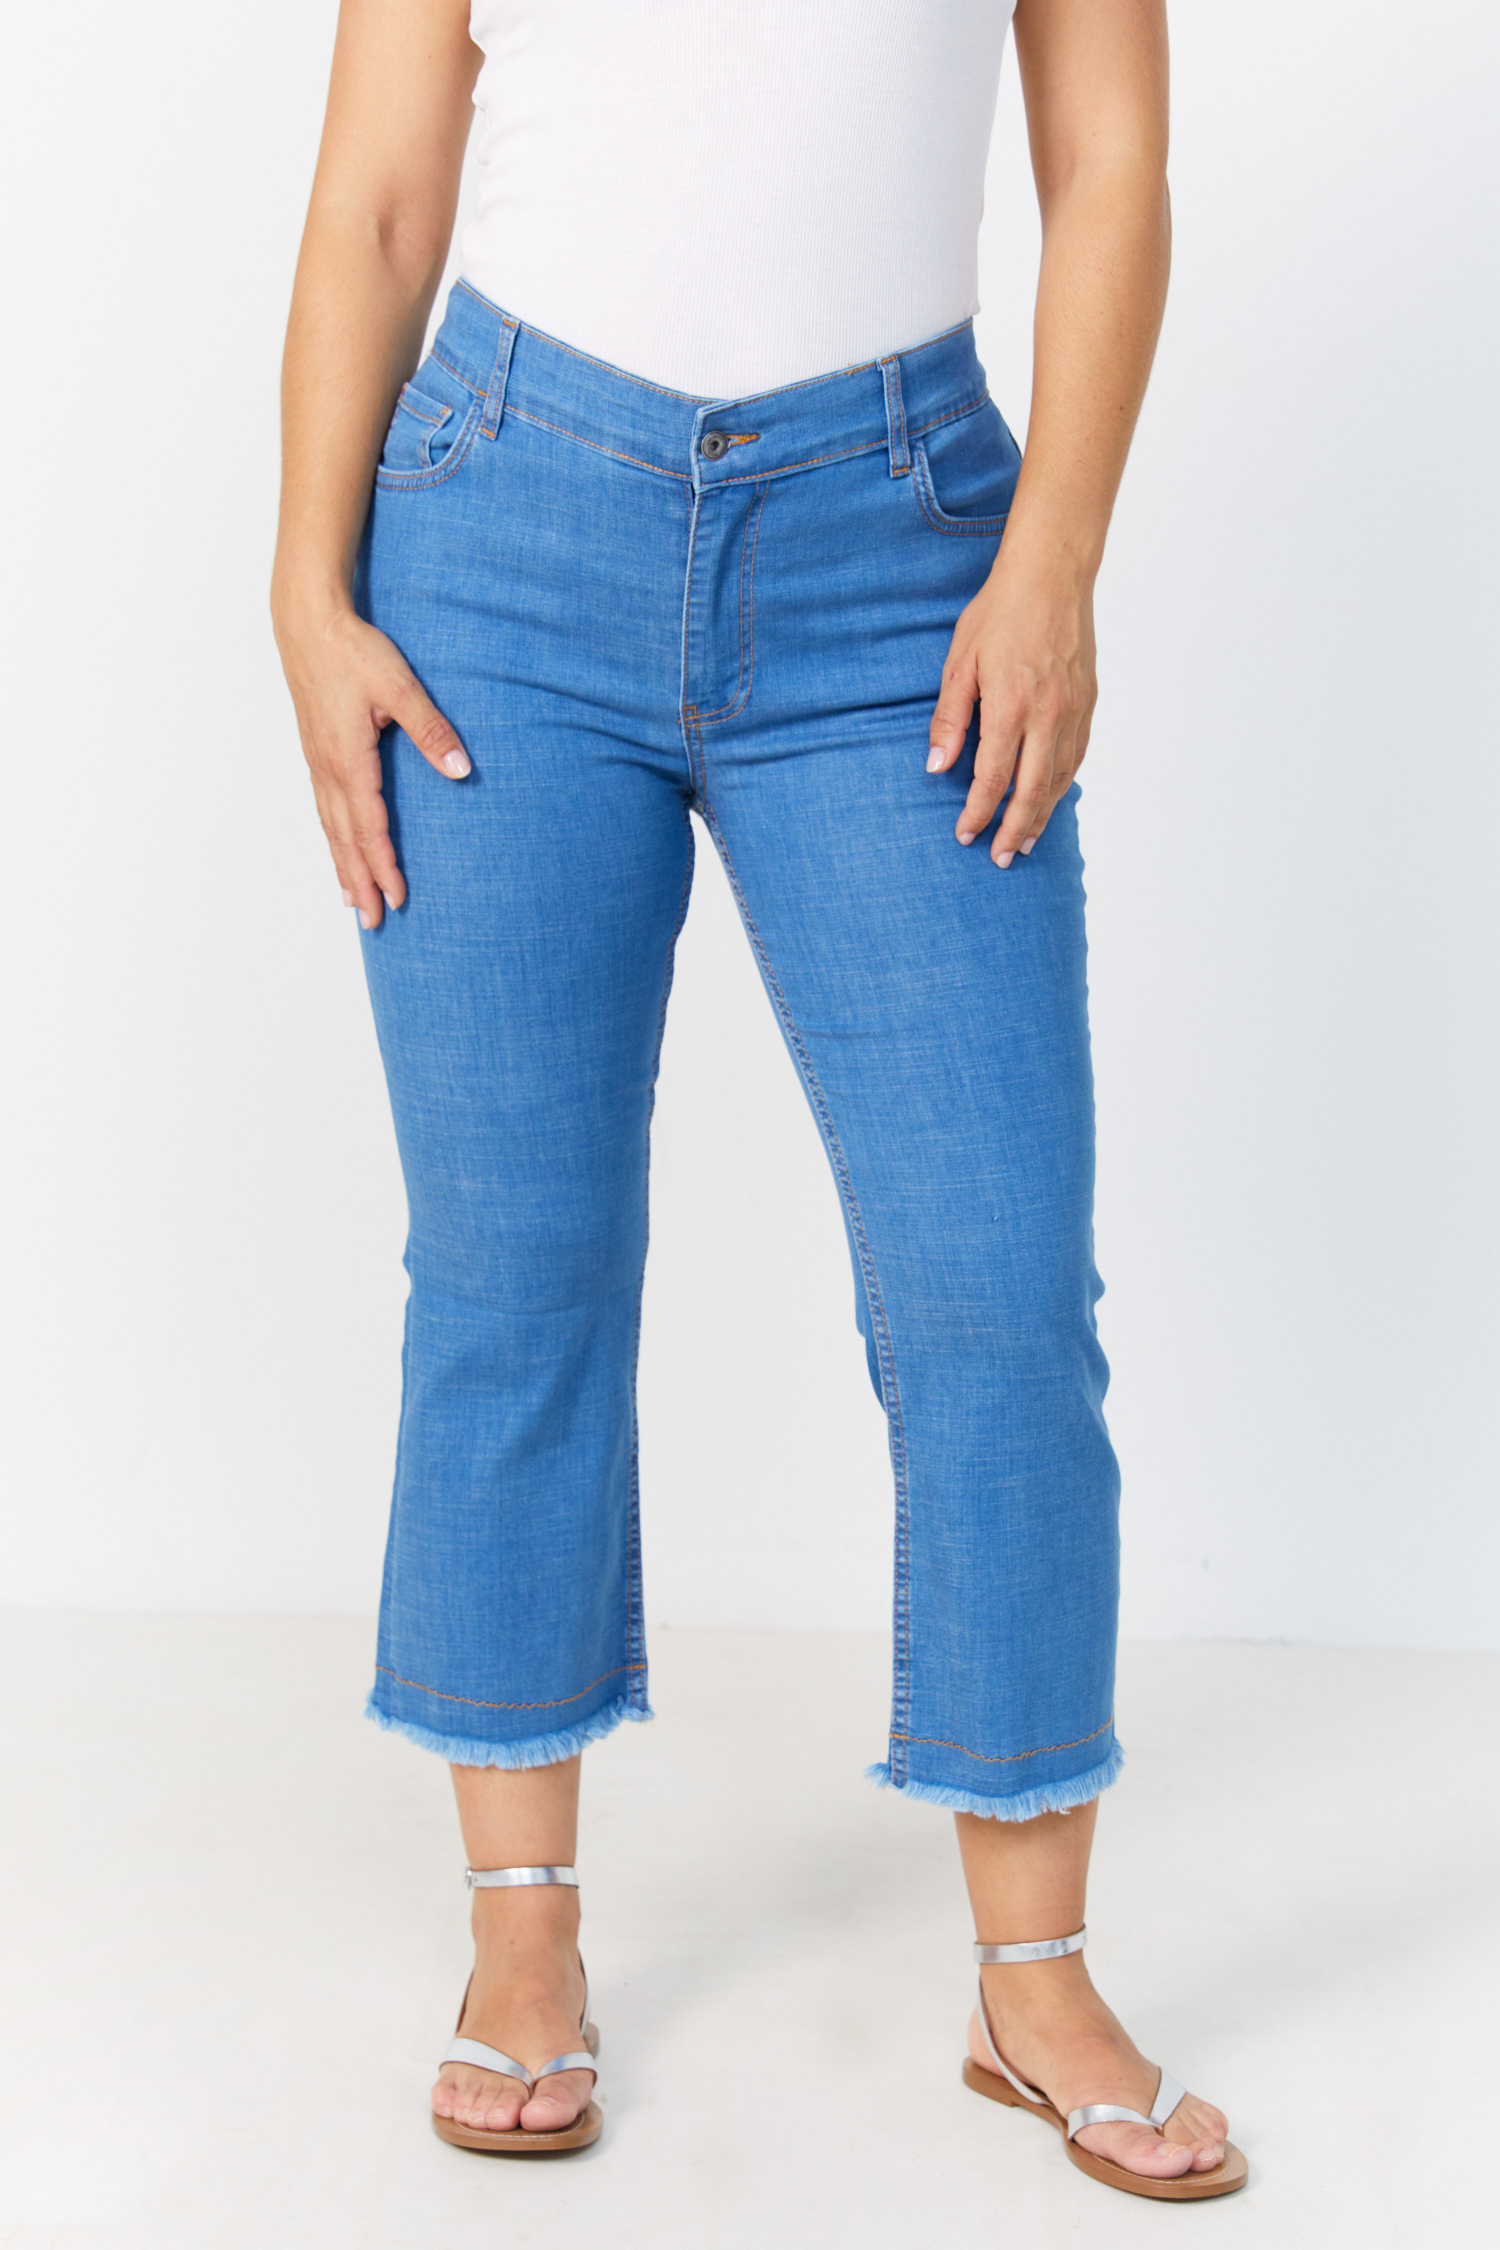 7/8 jeans with fringes at the bottom